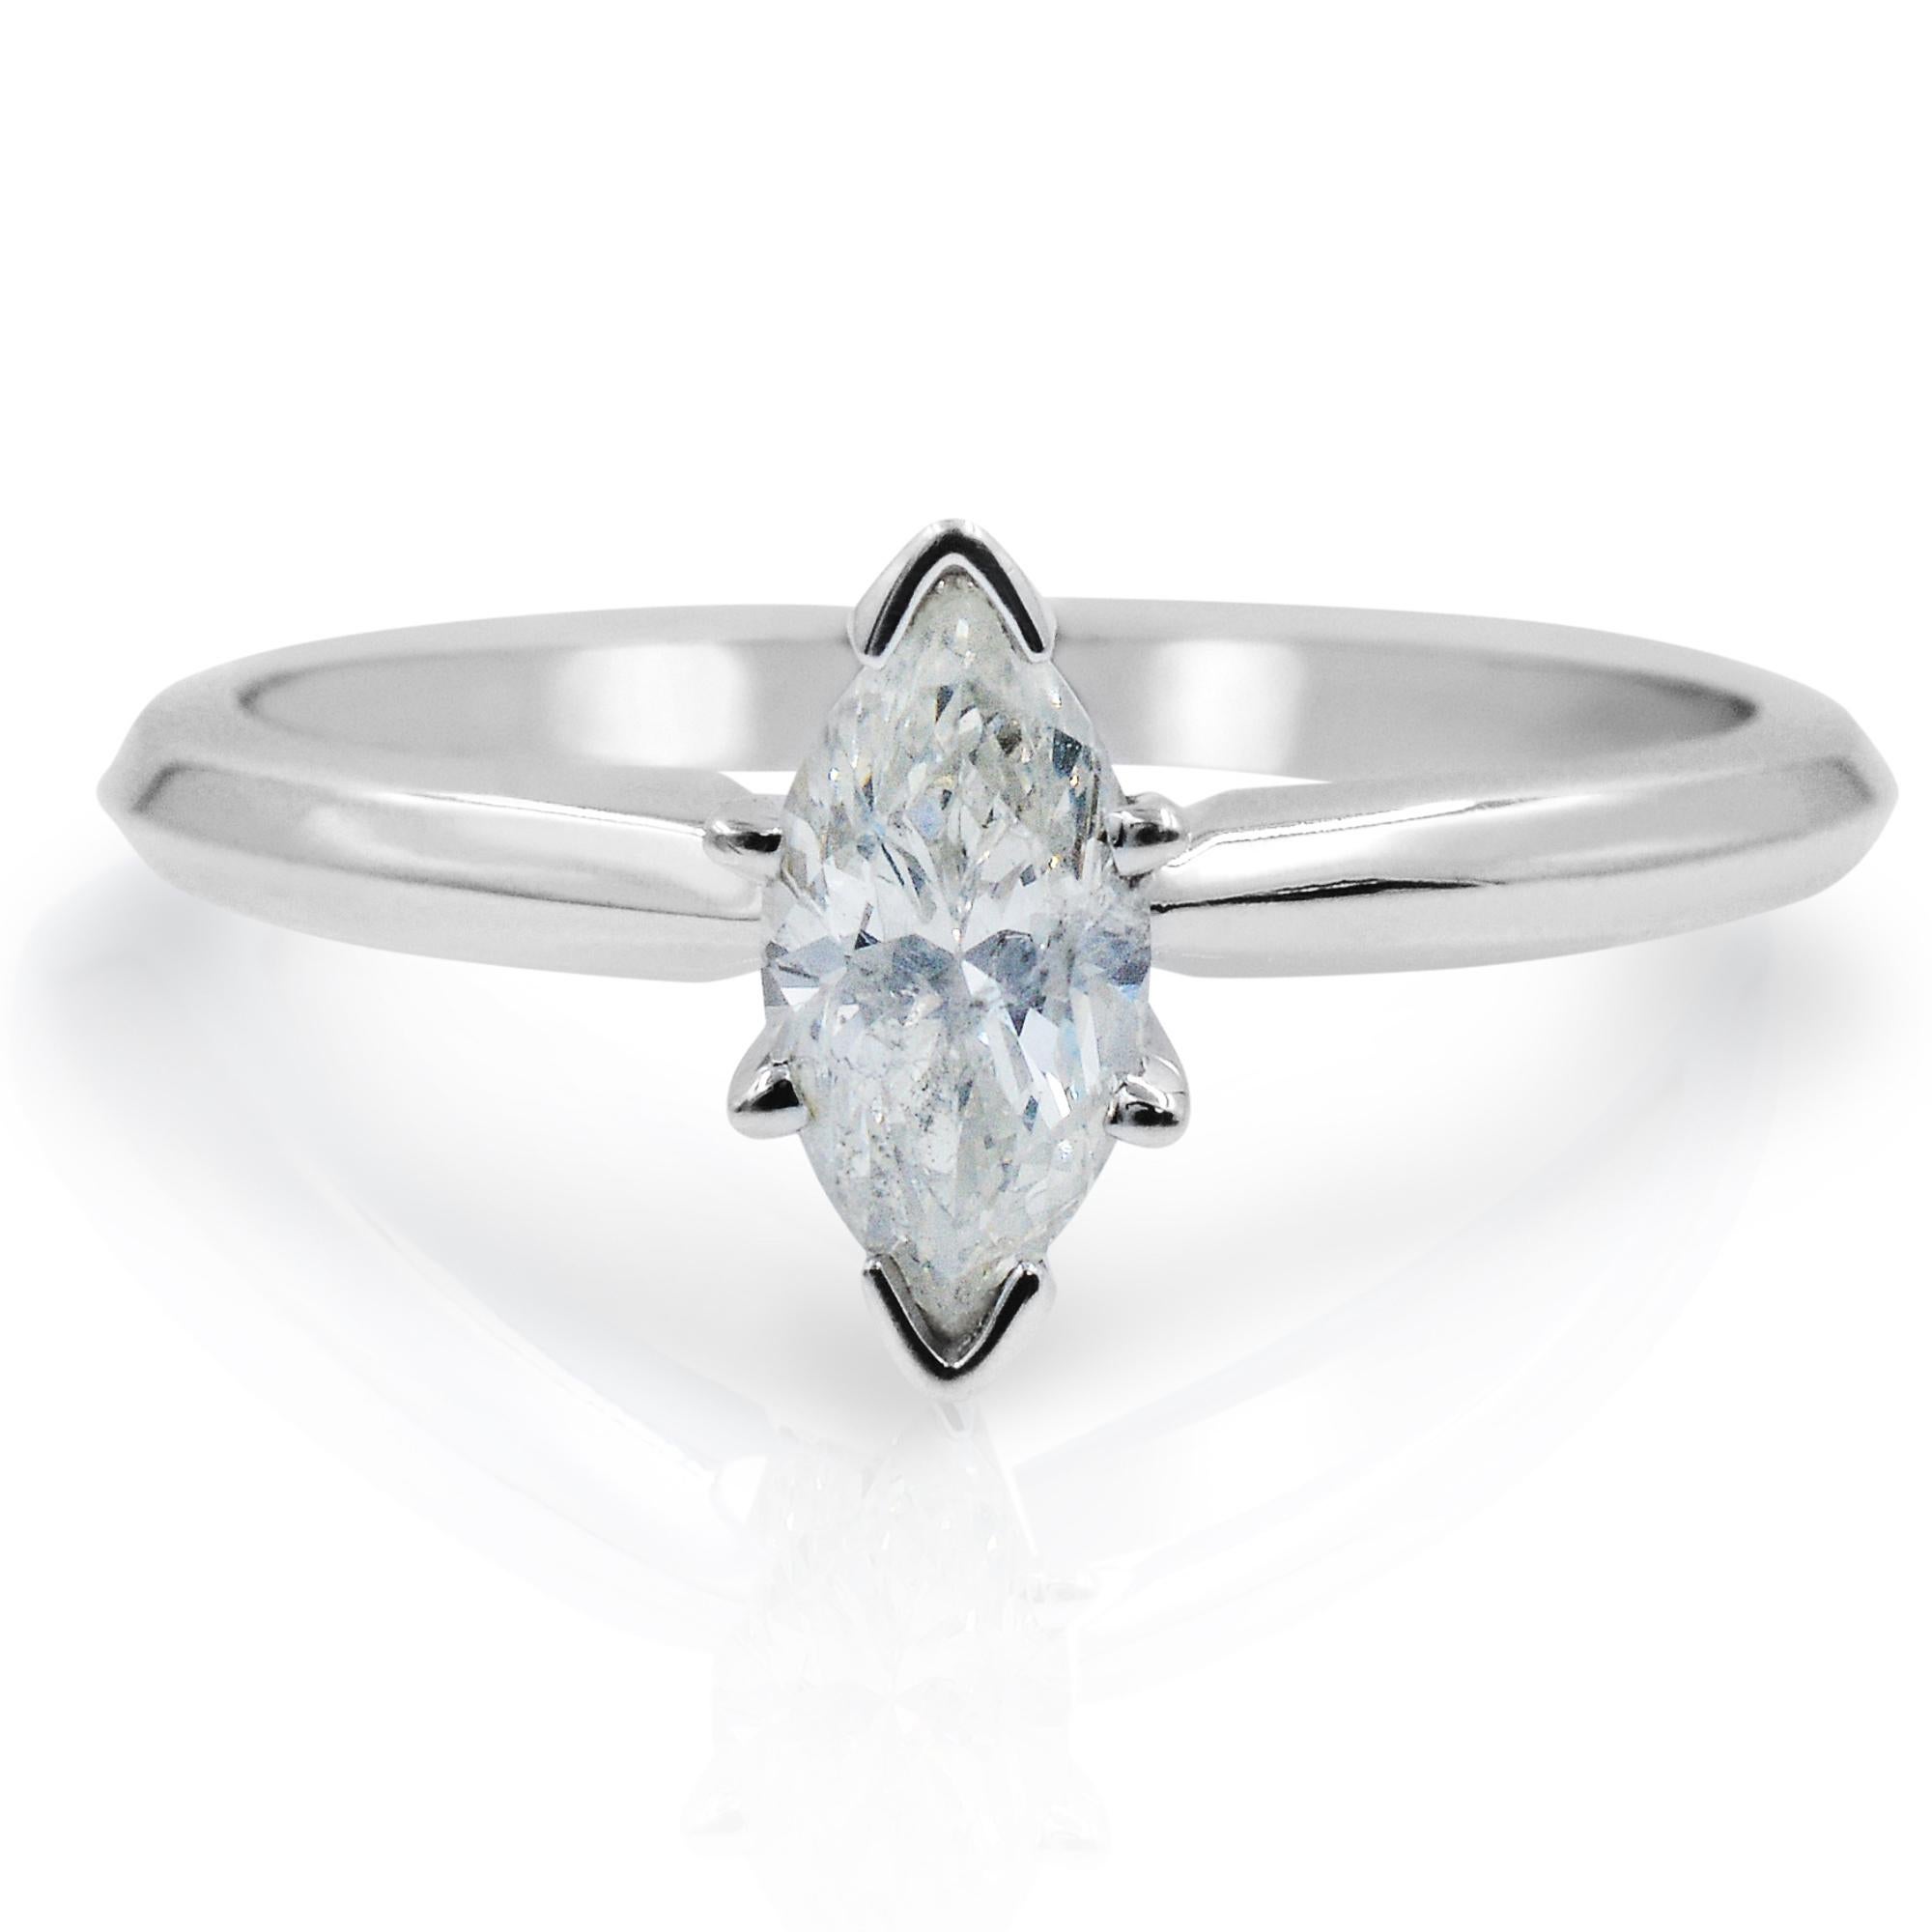 This beautiful solitaire engagement ring crafted in 14k white gold features a prong set marquise cut diamond weighing 0.47 carat. Looking back in the 1700's, the marquise cut diamond has been a stand out for centuries. Diamond Quality: G-H color,